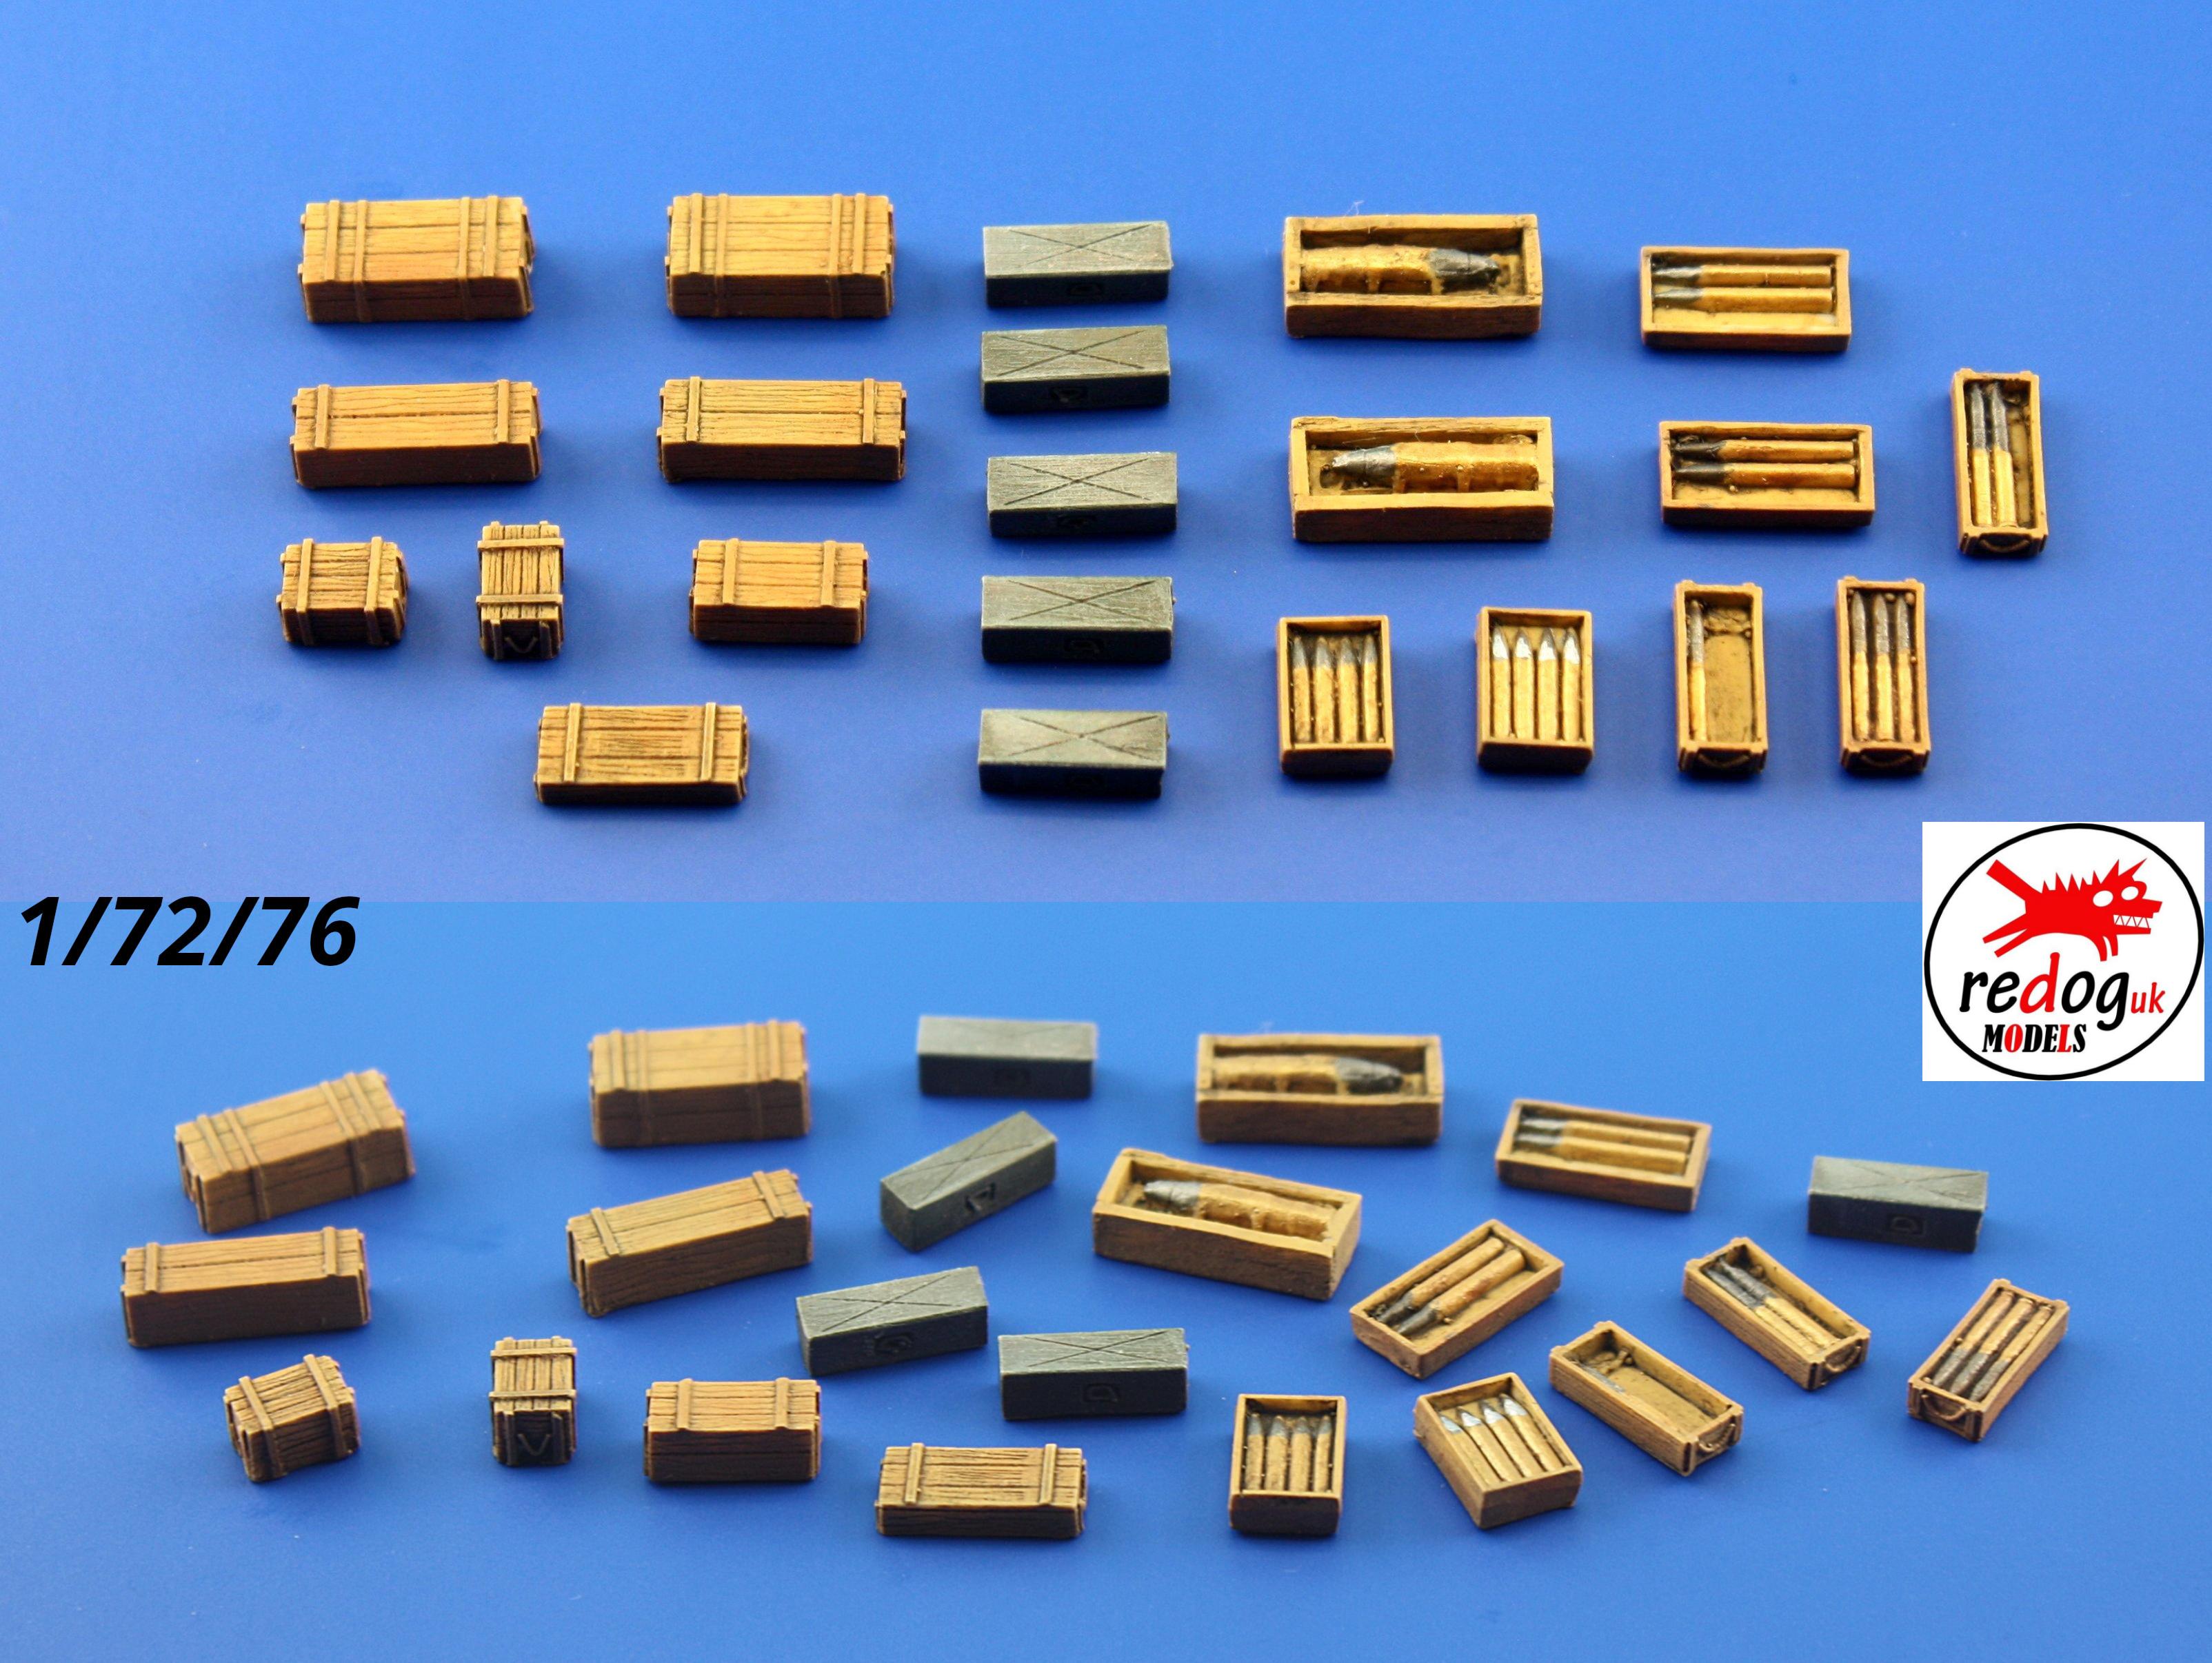 Redog 1:72 Crates and Boxes Kit Military Scale Modelling Stowage Diorama Accessories